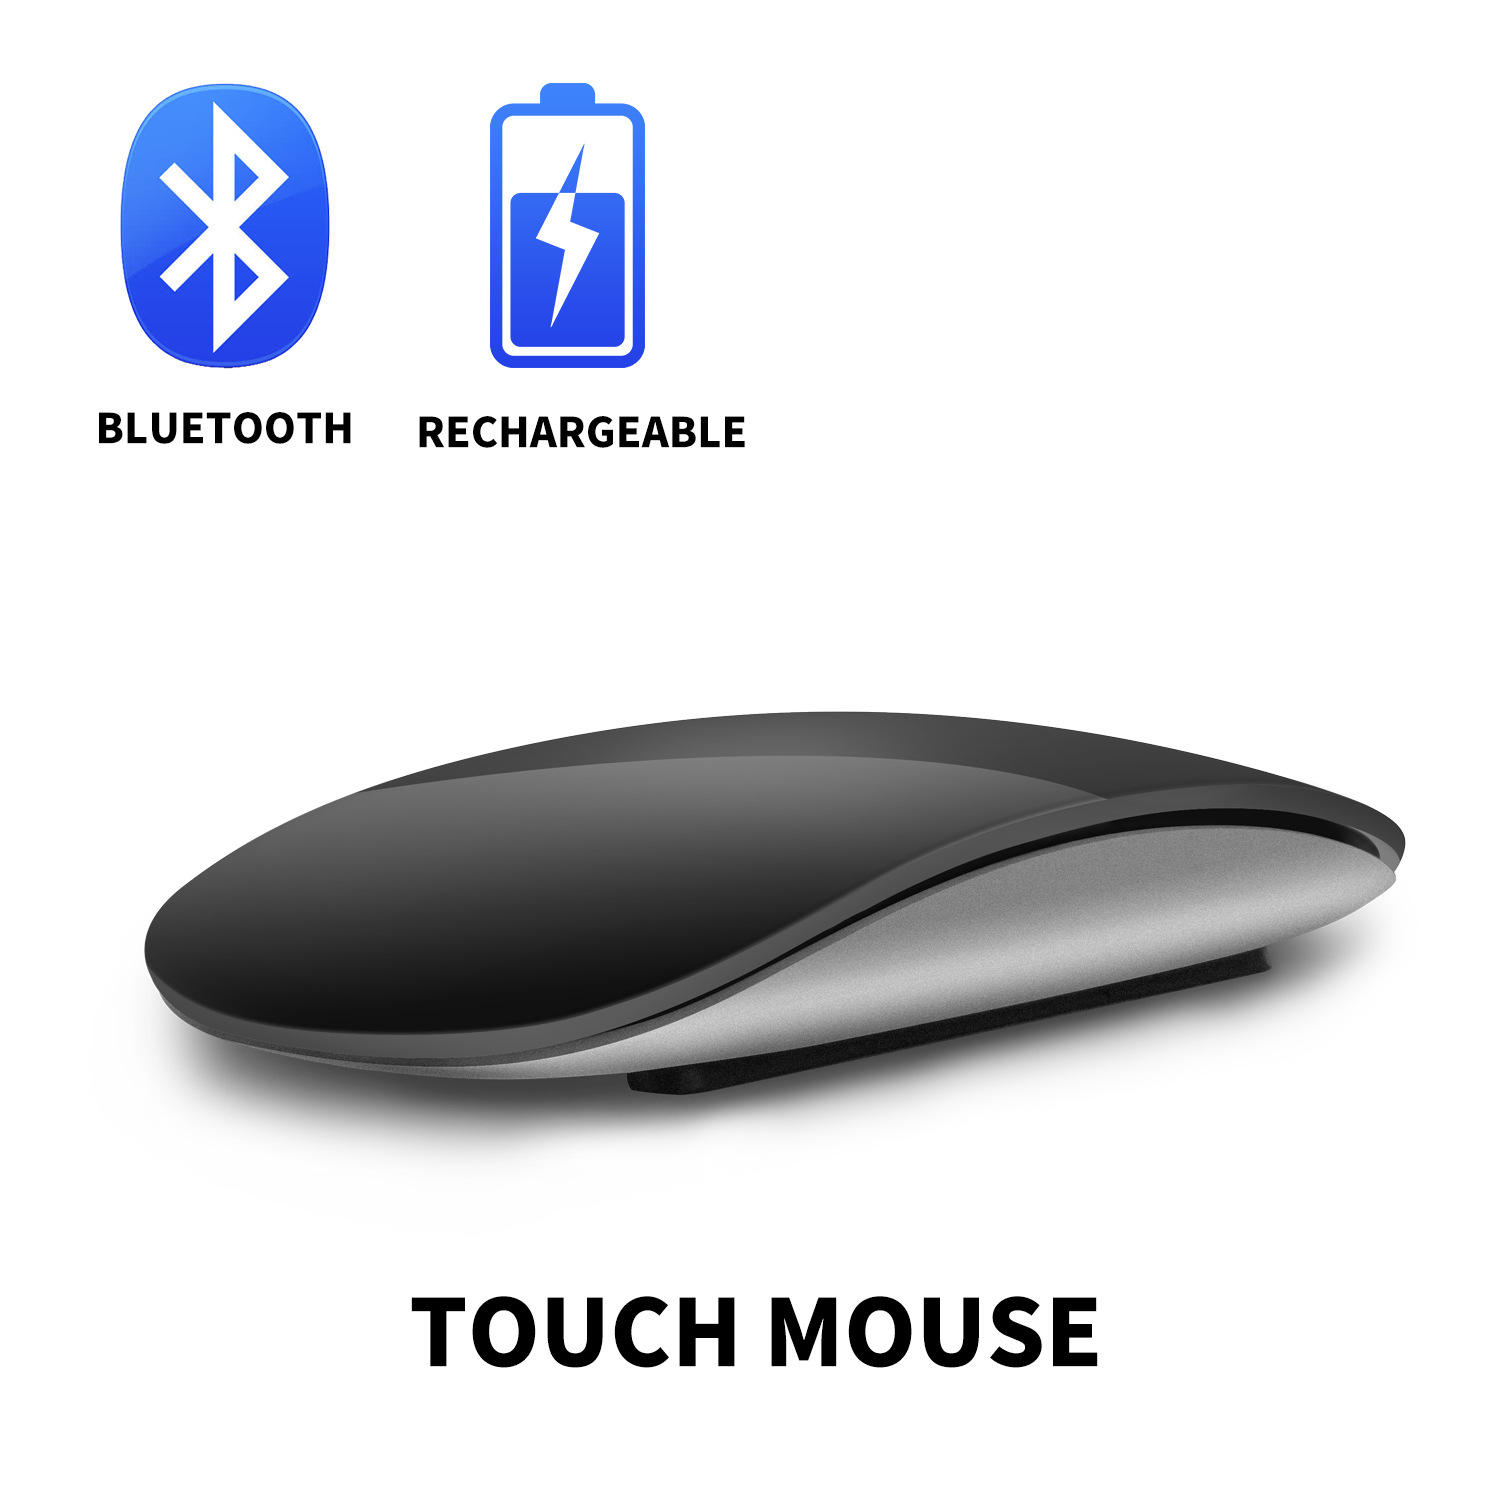 M512 Portable Thin Rechargeable Touch mouse Slim magic wirel